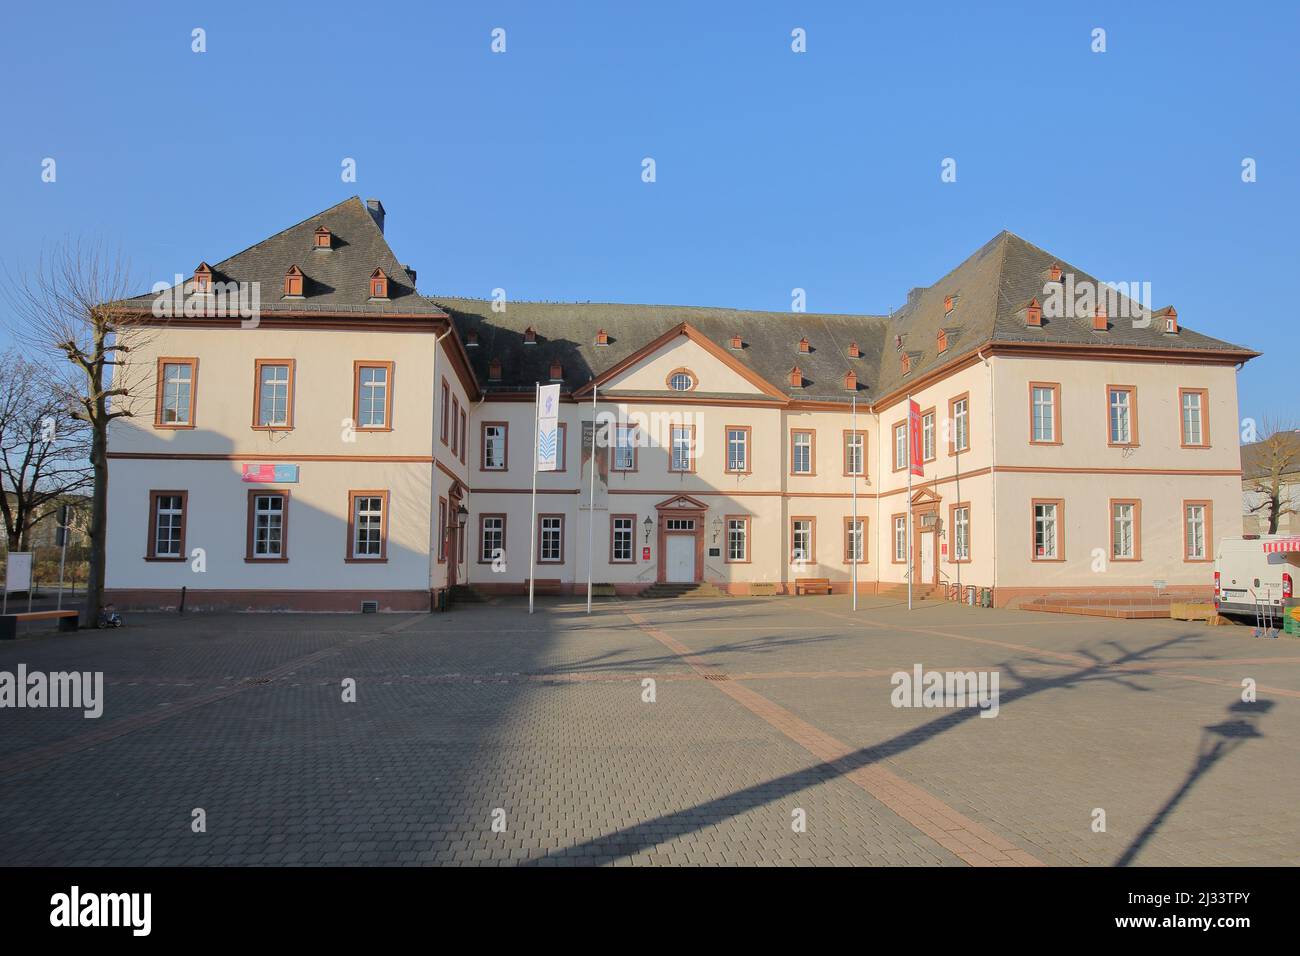 New Palace built in 1713 in Simmern in the Hunsrueck, Rhineland-Palatinate, Germany Stock Photo